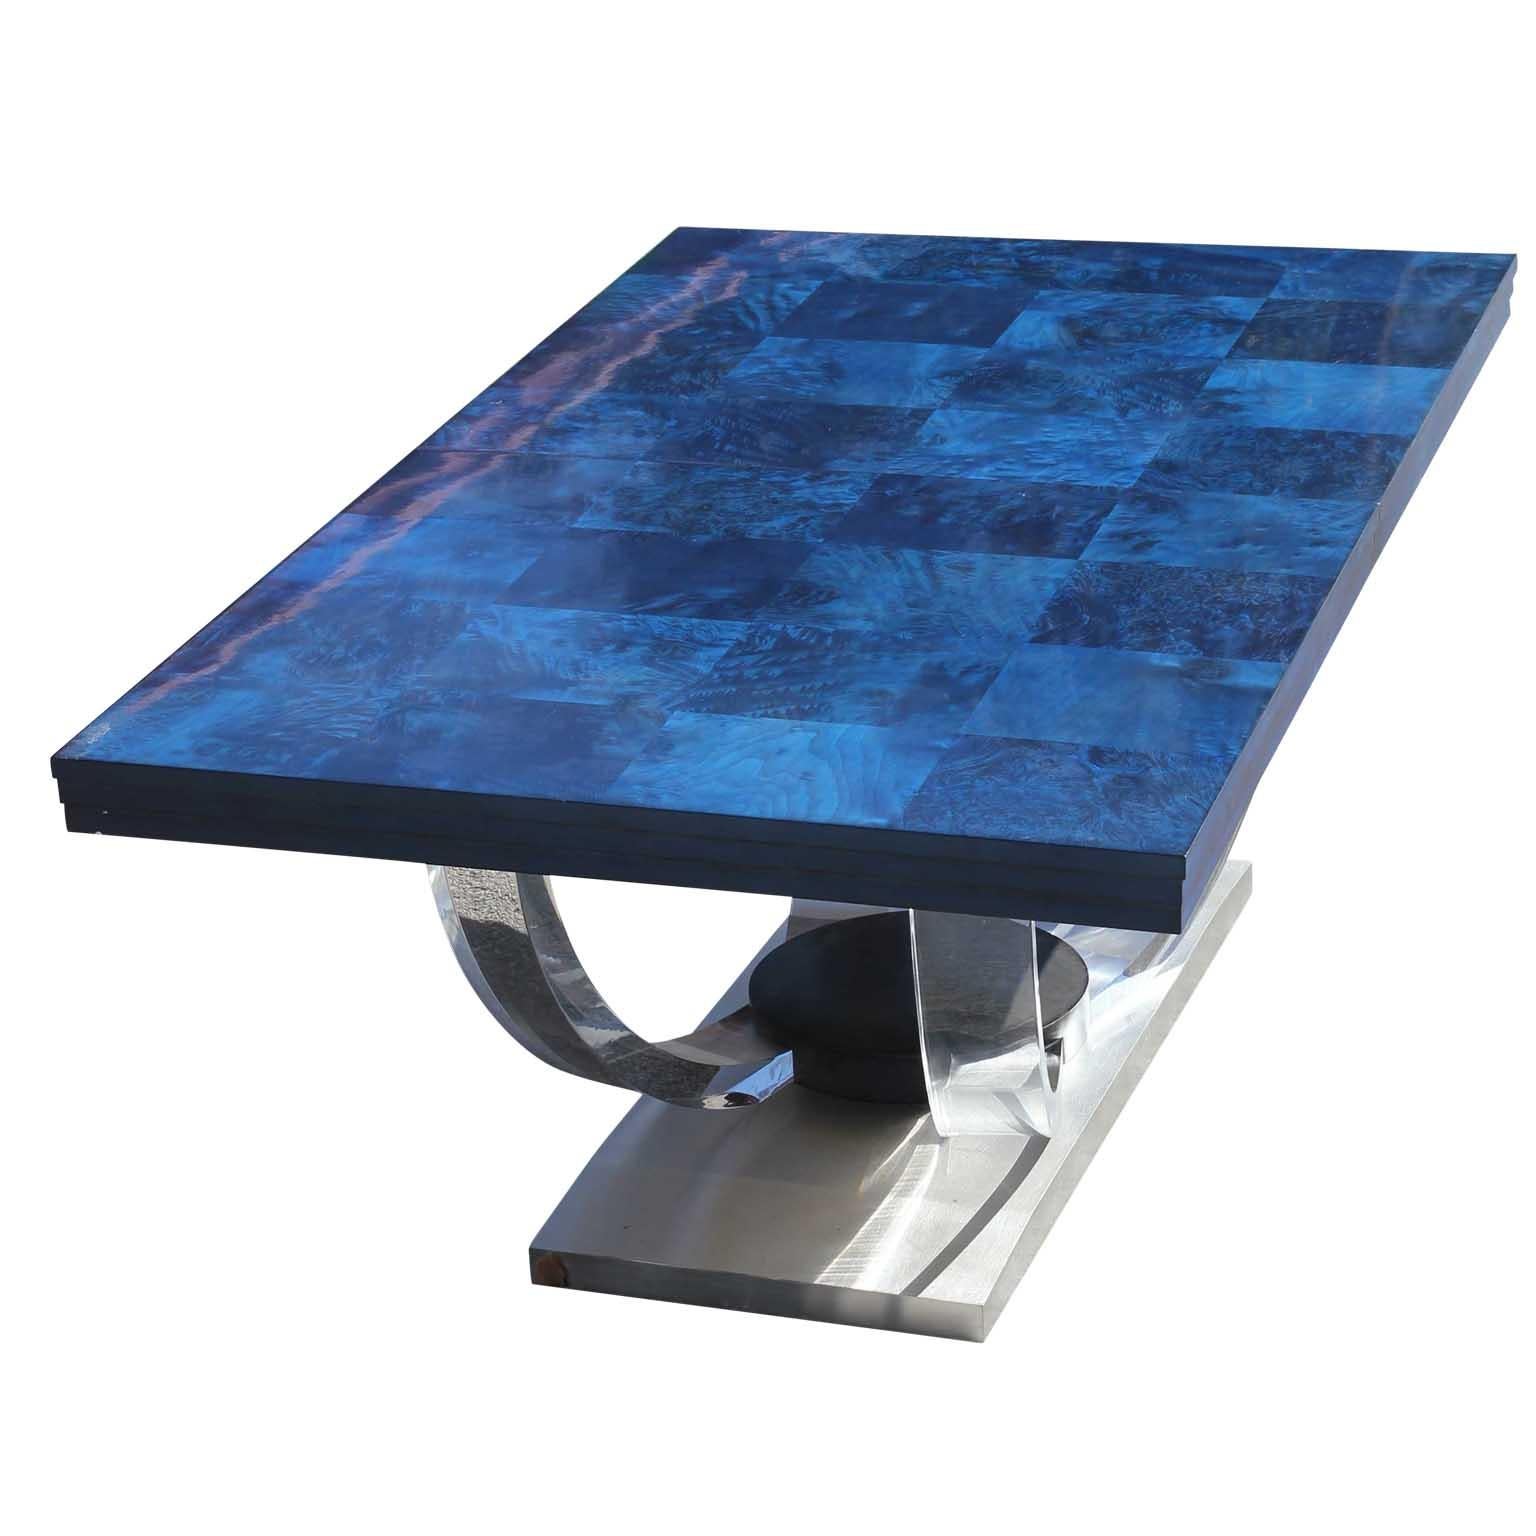 Unique Art Deco style table with sculptural acrylic legs and a silver base. The top is a blue aniline dyed burl wood. The table without the leaf sits 6 to 8 people and with the leaf is can sit 10 to 12 people.